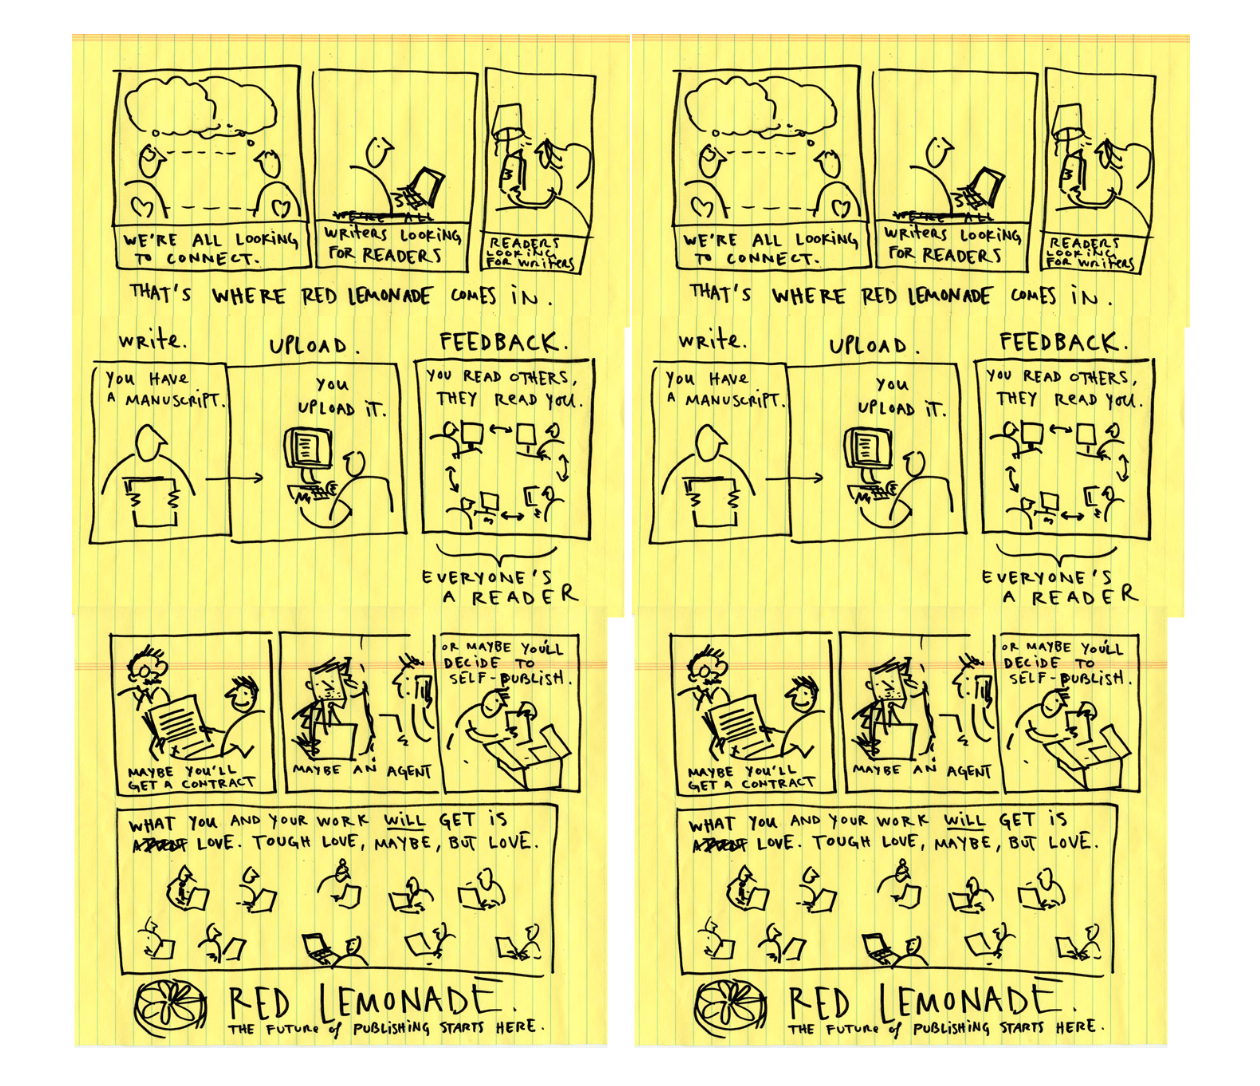 Image of a hand drawn storyboard depicting what Red Lemonade does as a company